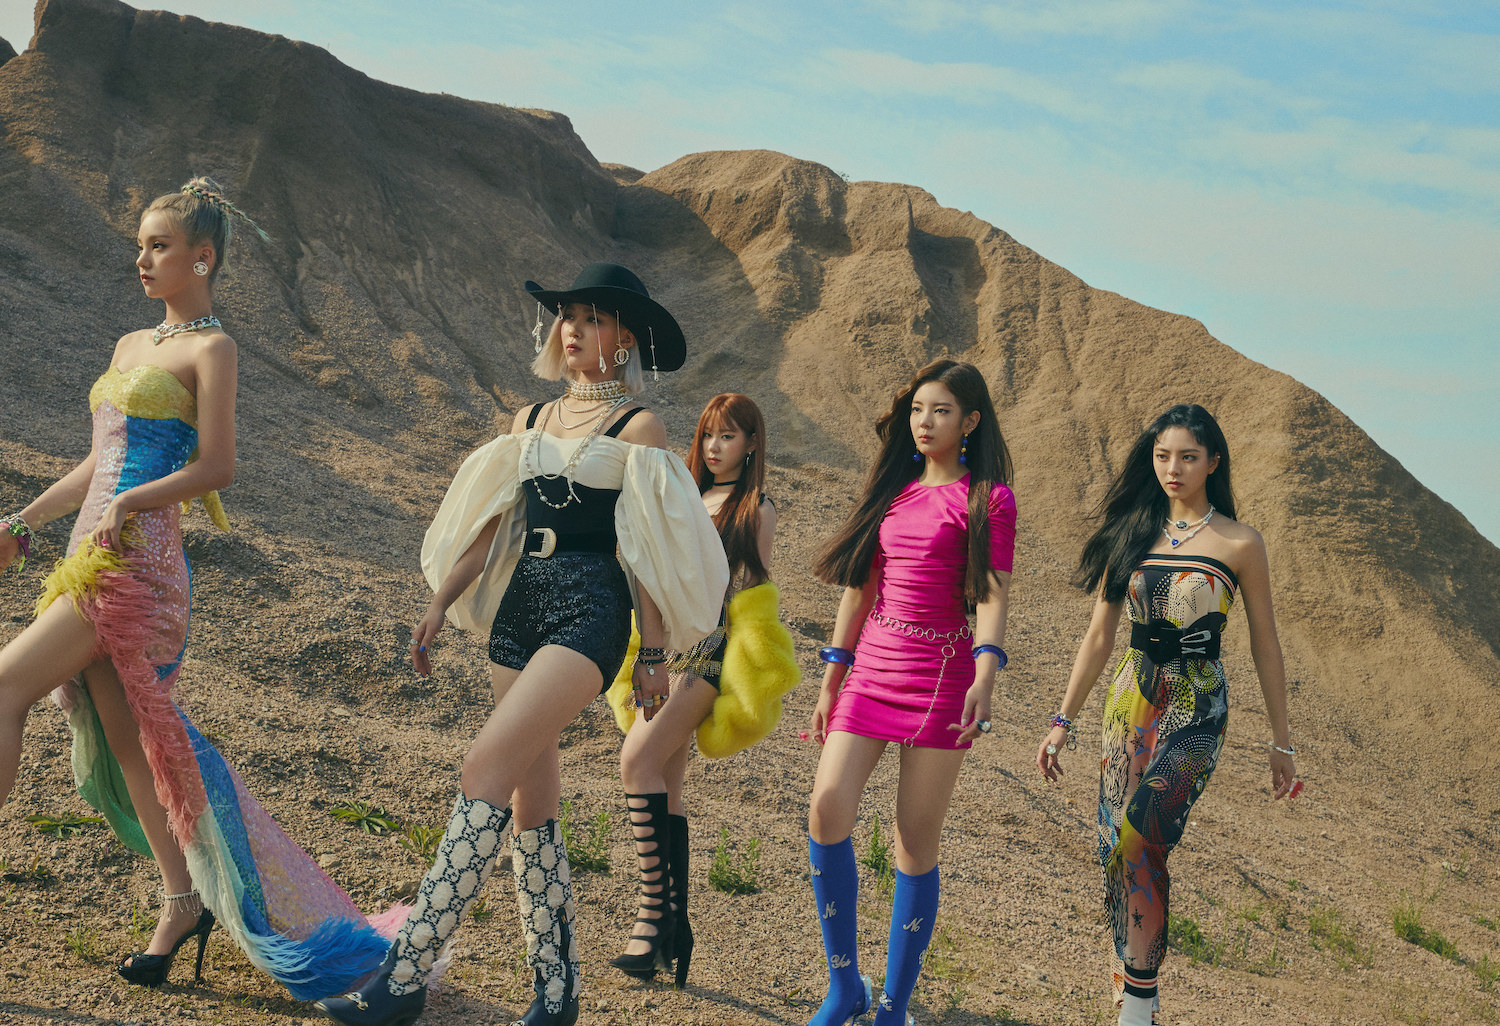 ITZY walks together through the desert in their high heels and dresses